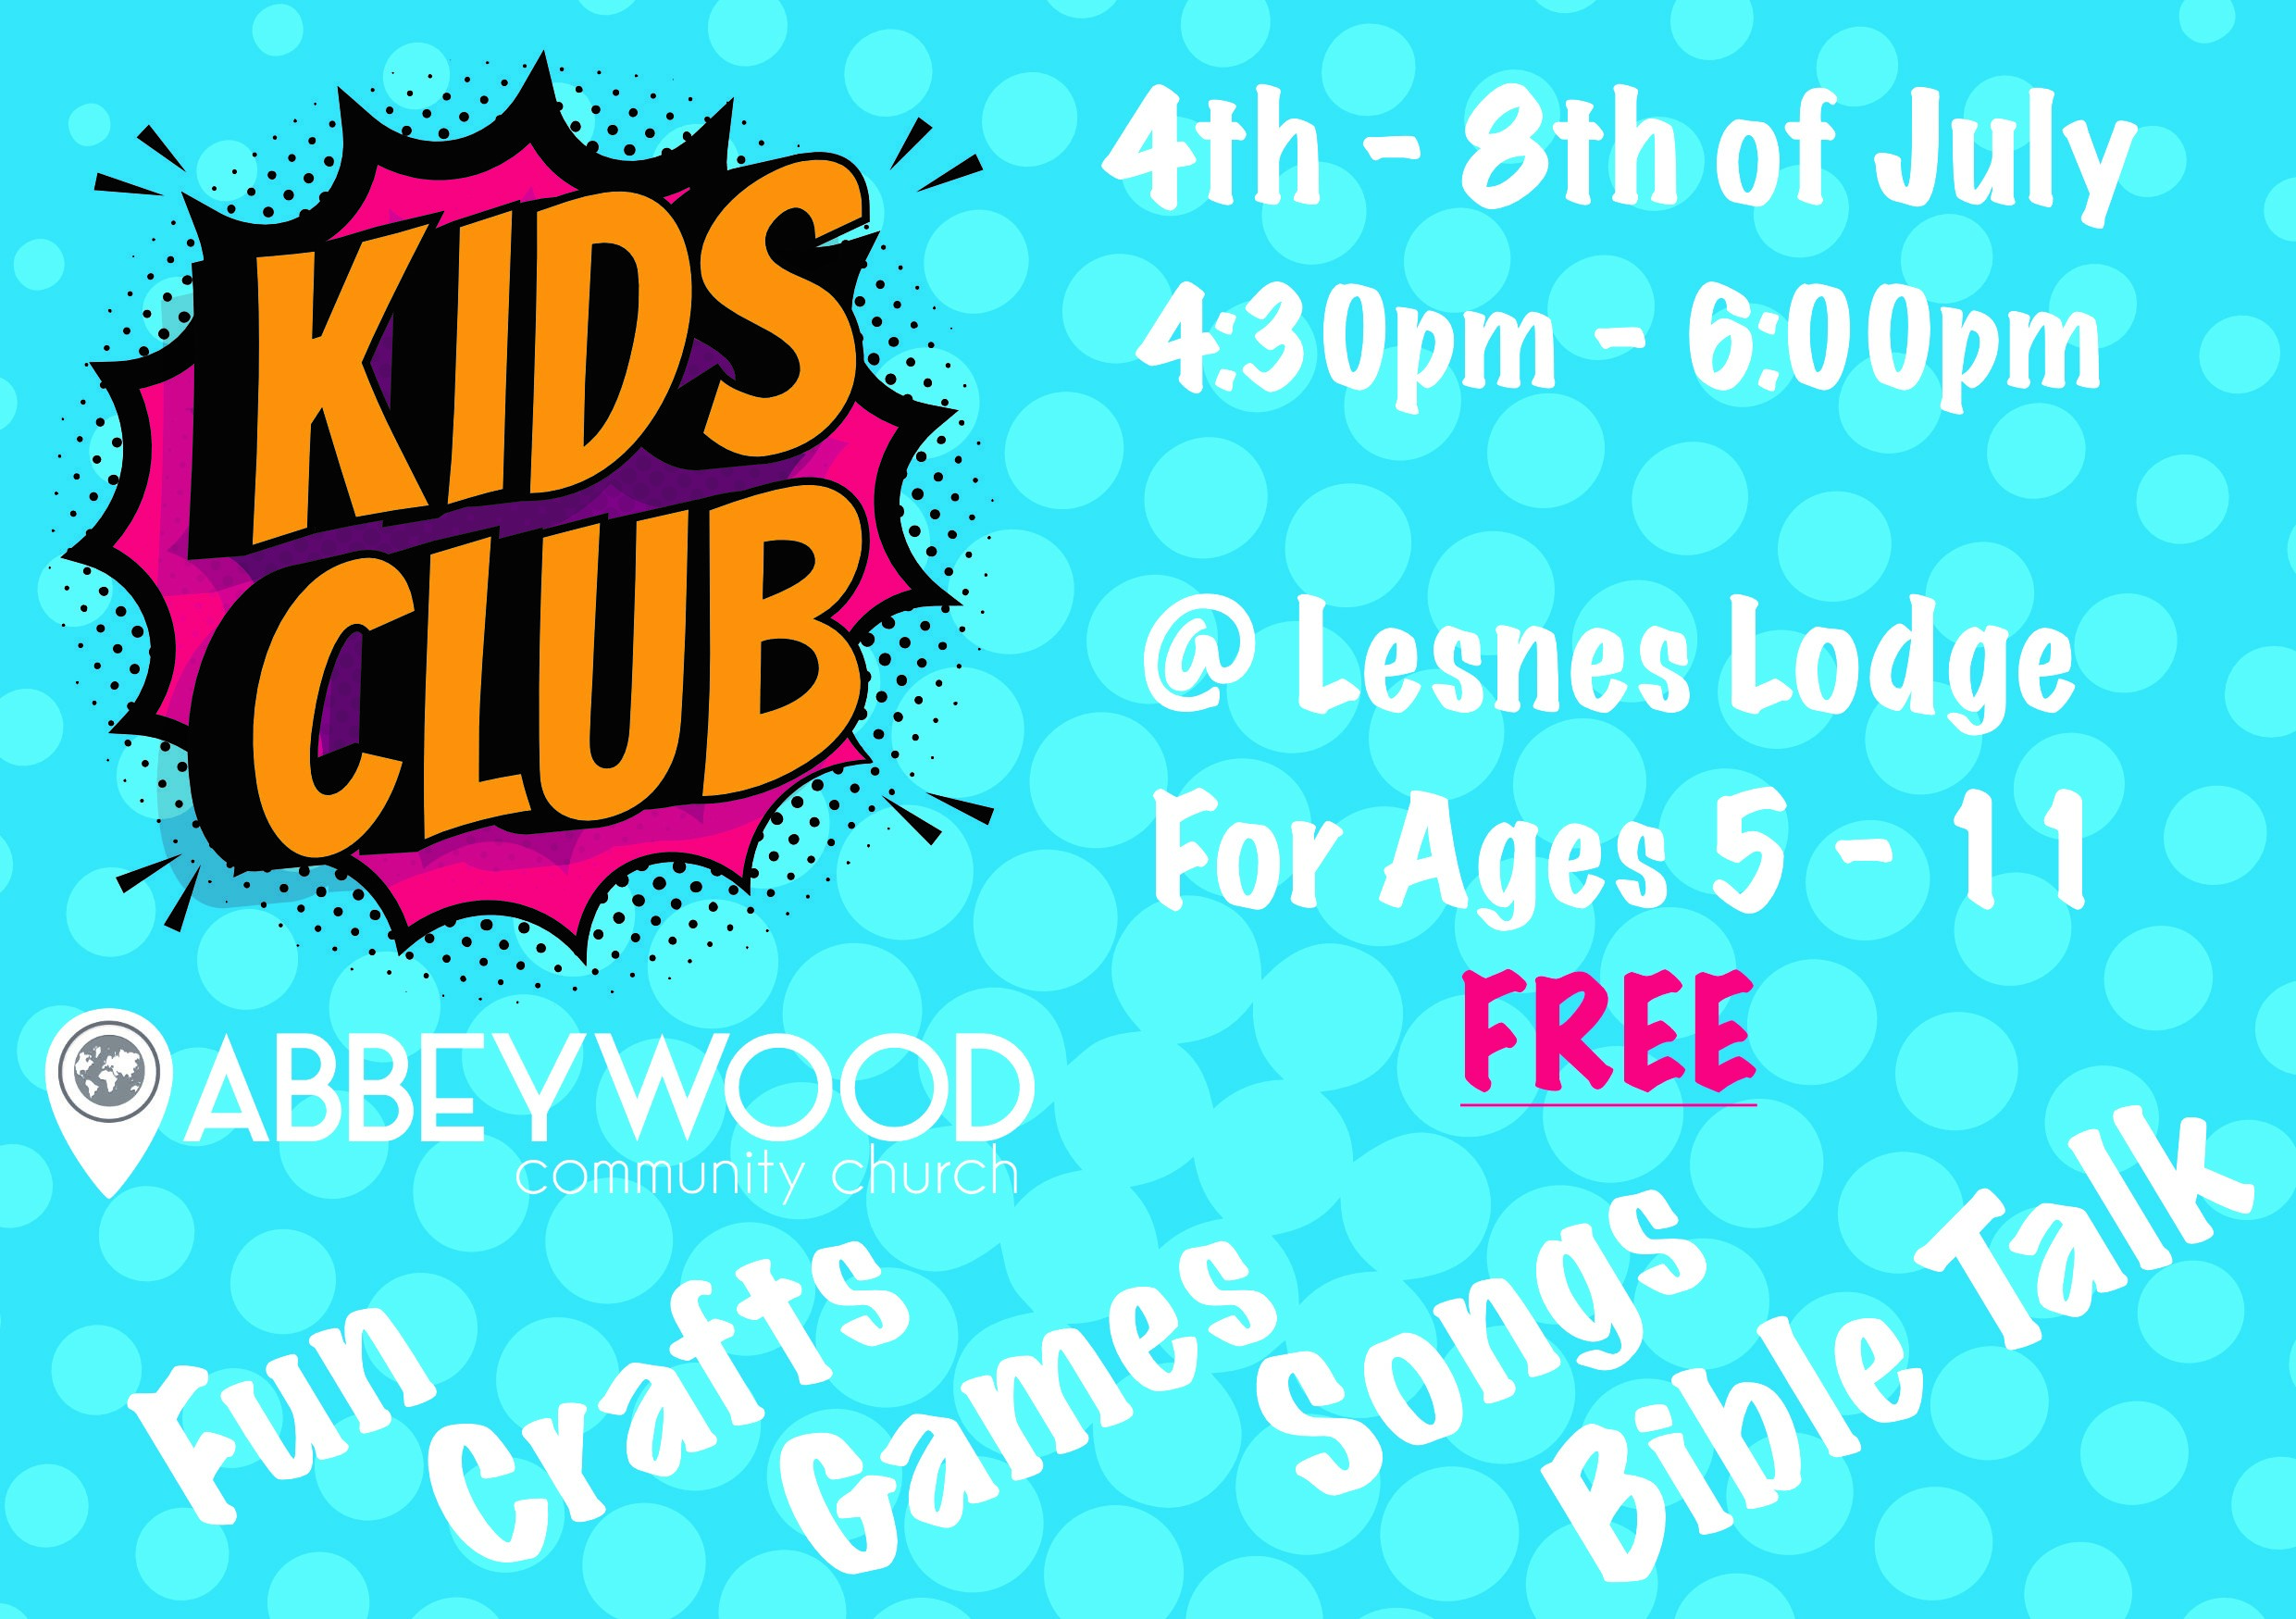 Poster advertised free kids club 4th July until 8th July 2022 4.30pm until 6pm free